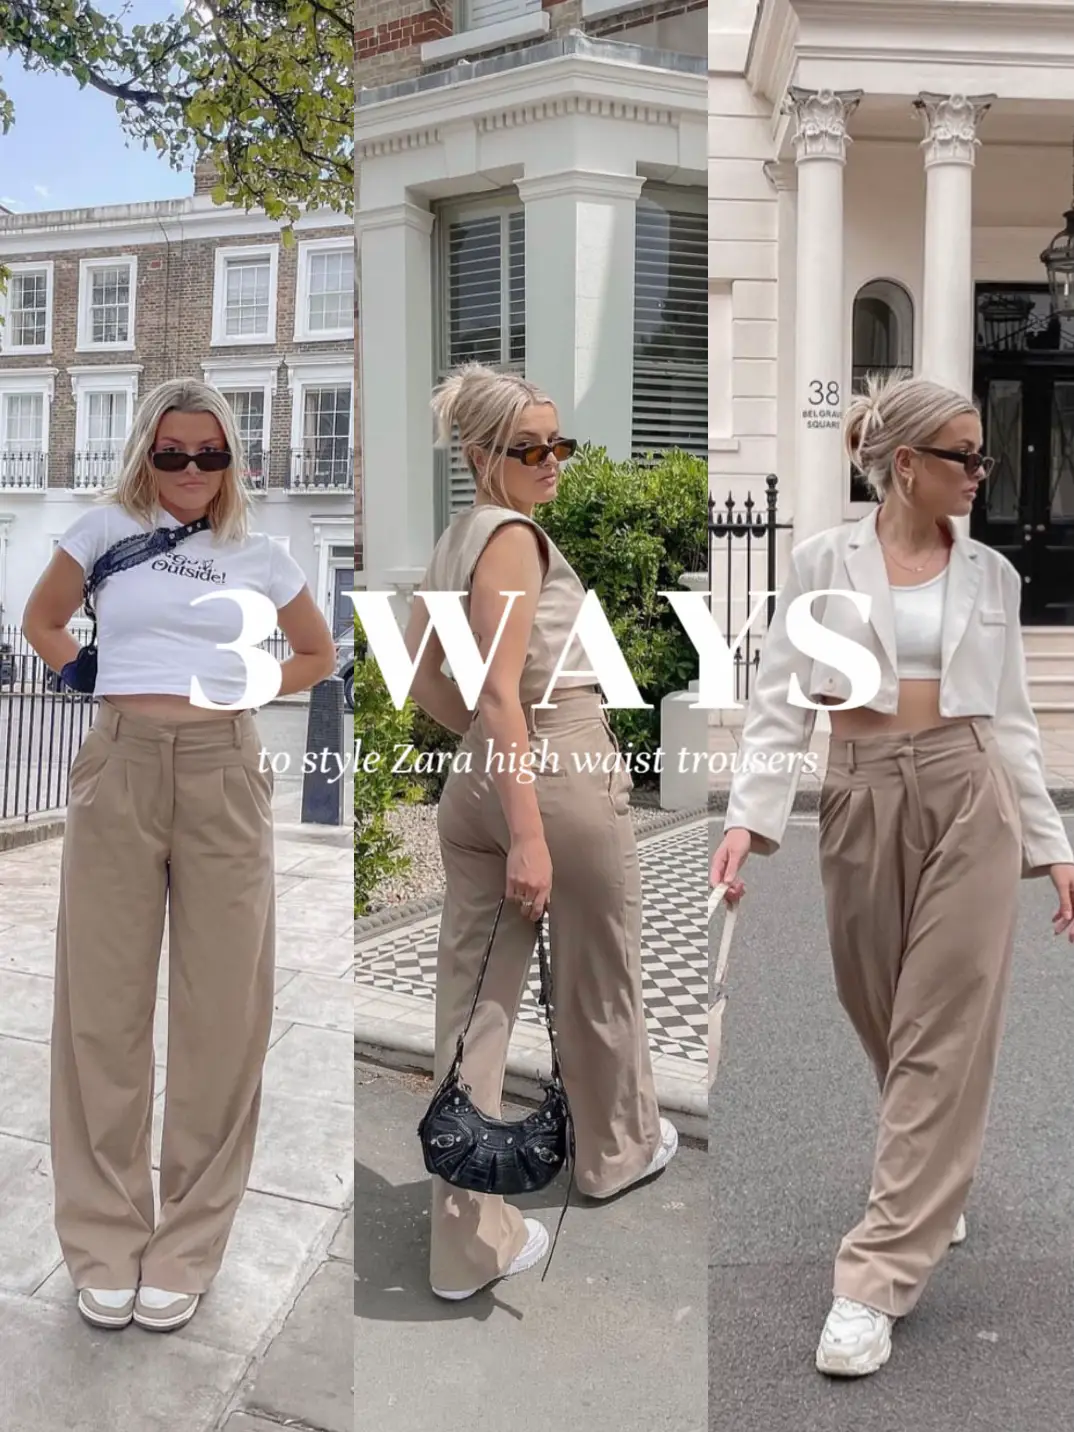 3 WAYS TO STYLE TROUSERS, Gallery posted by chloe anne